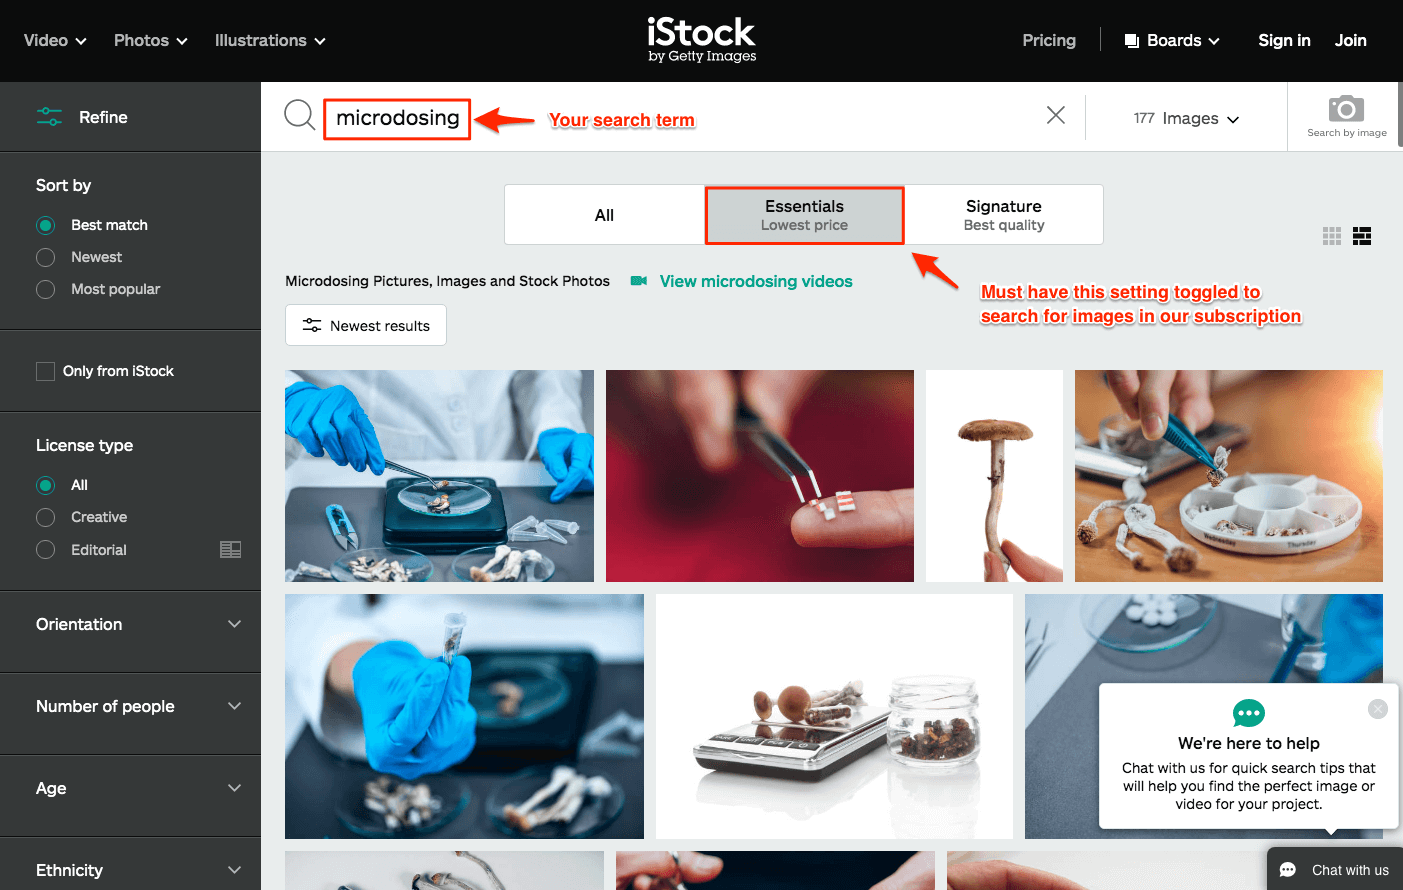 Screenshot of iSstockphoto.com, search page with search term